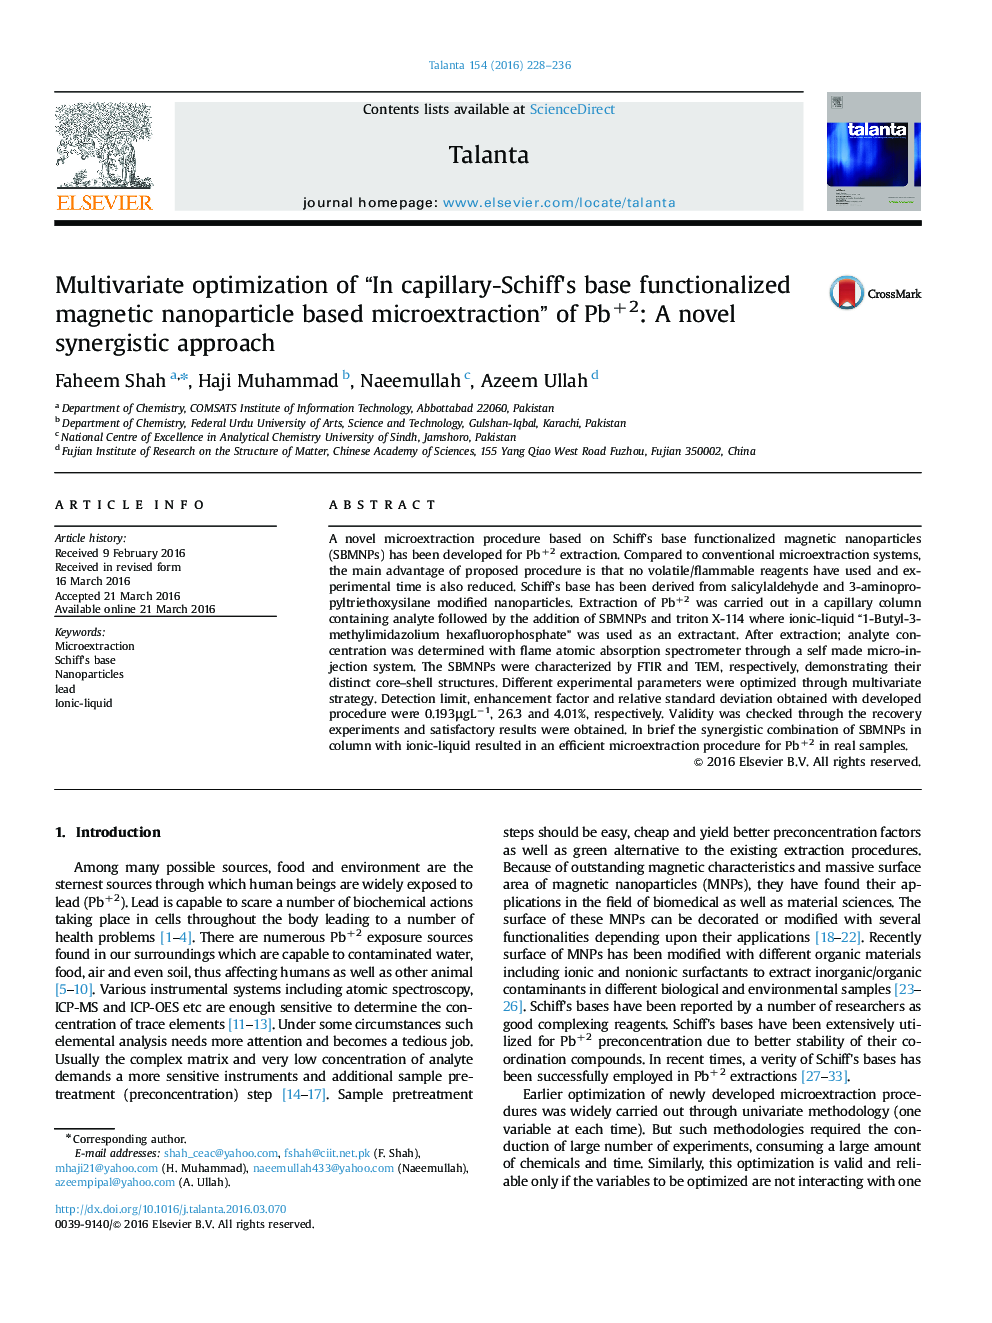 Multivariate optimization of “In capillary-Schiff's base functionalized magnetic nanoparticle based microextraction” of Pb+2: A novel synergistic approach